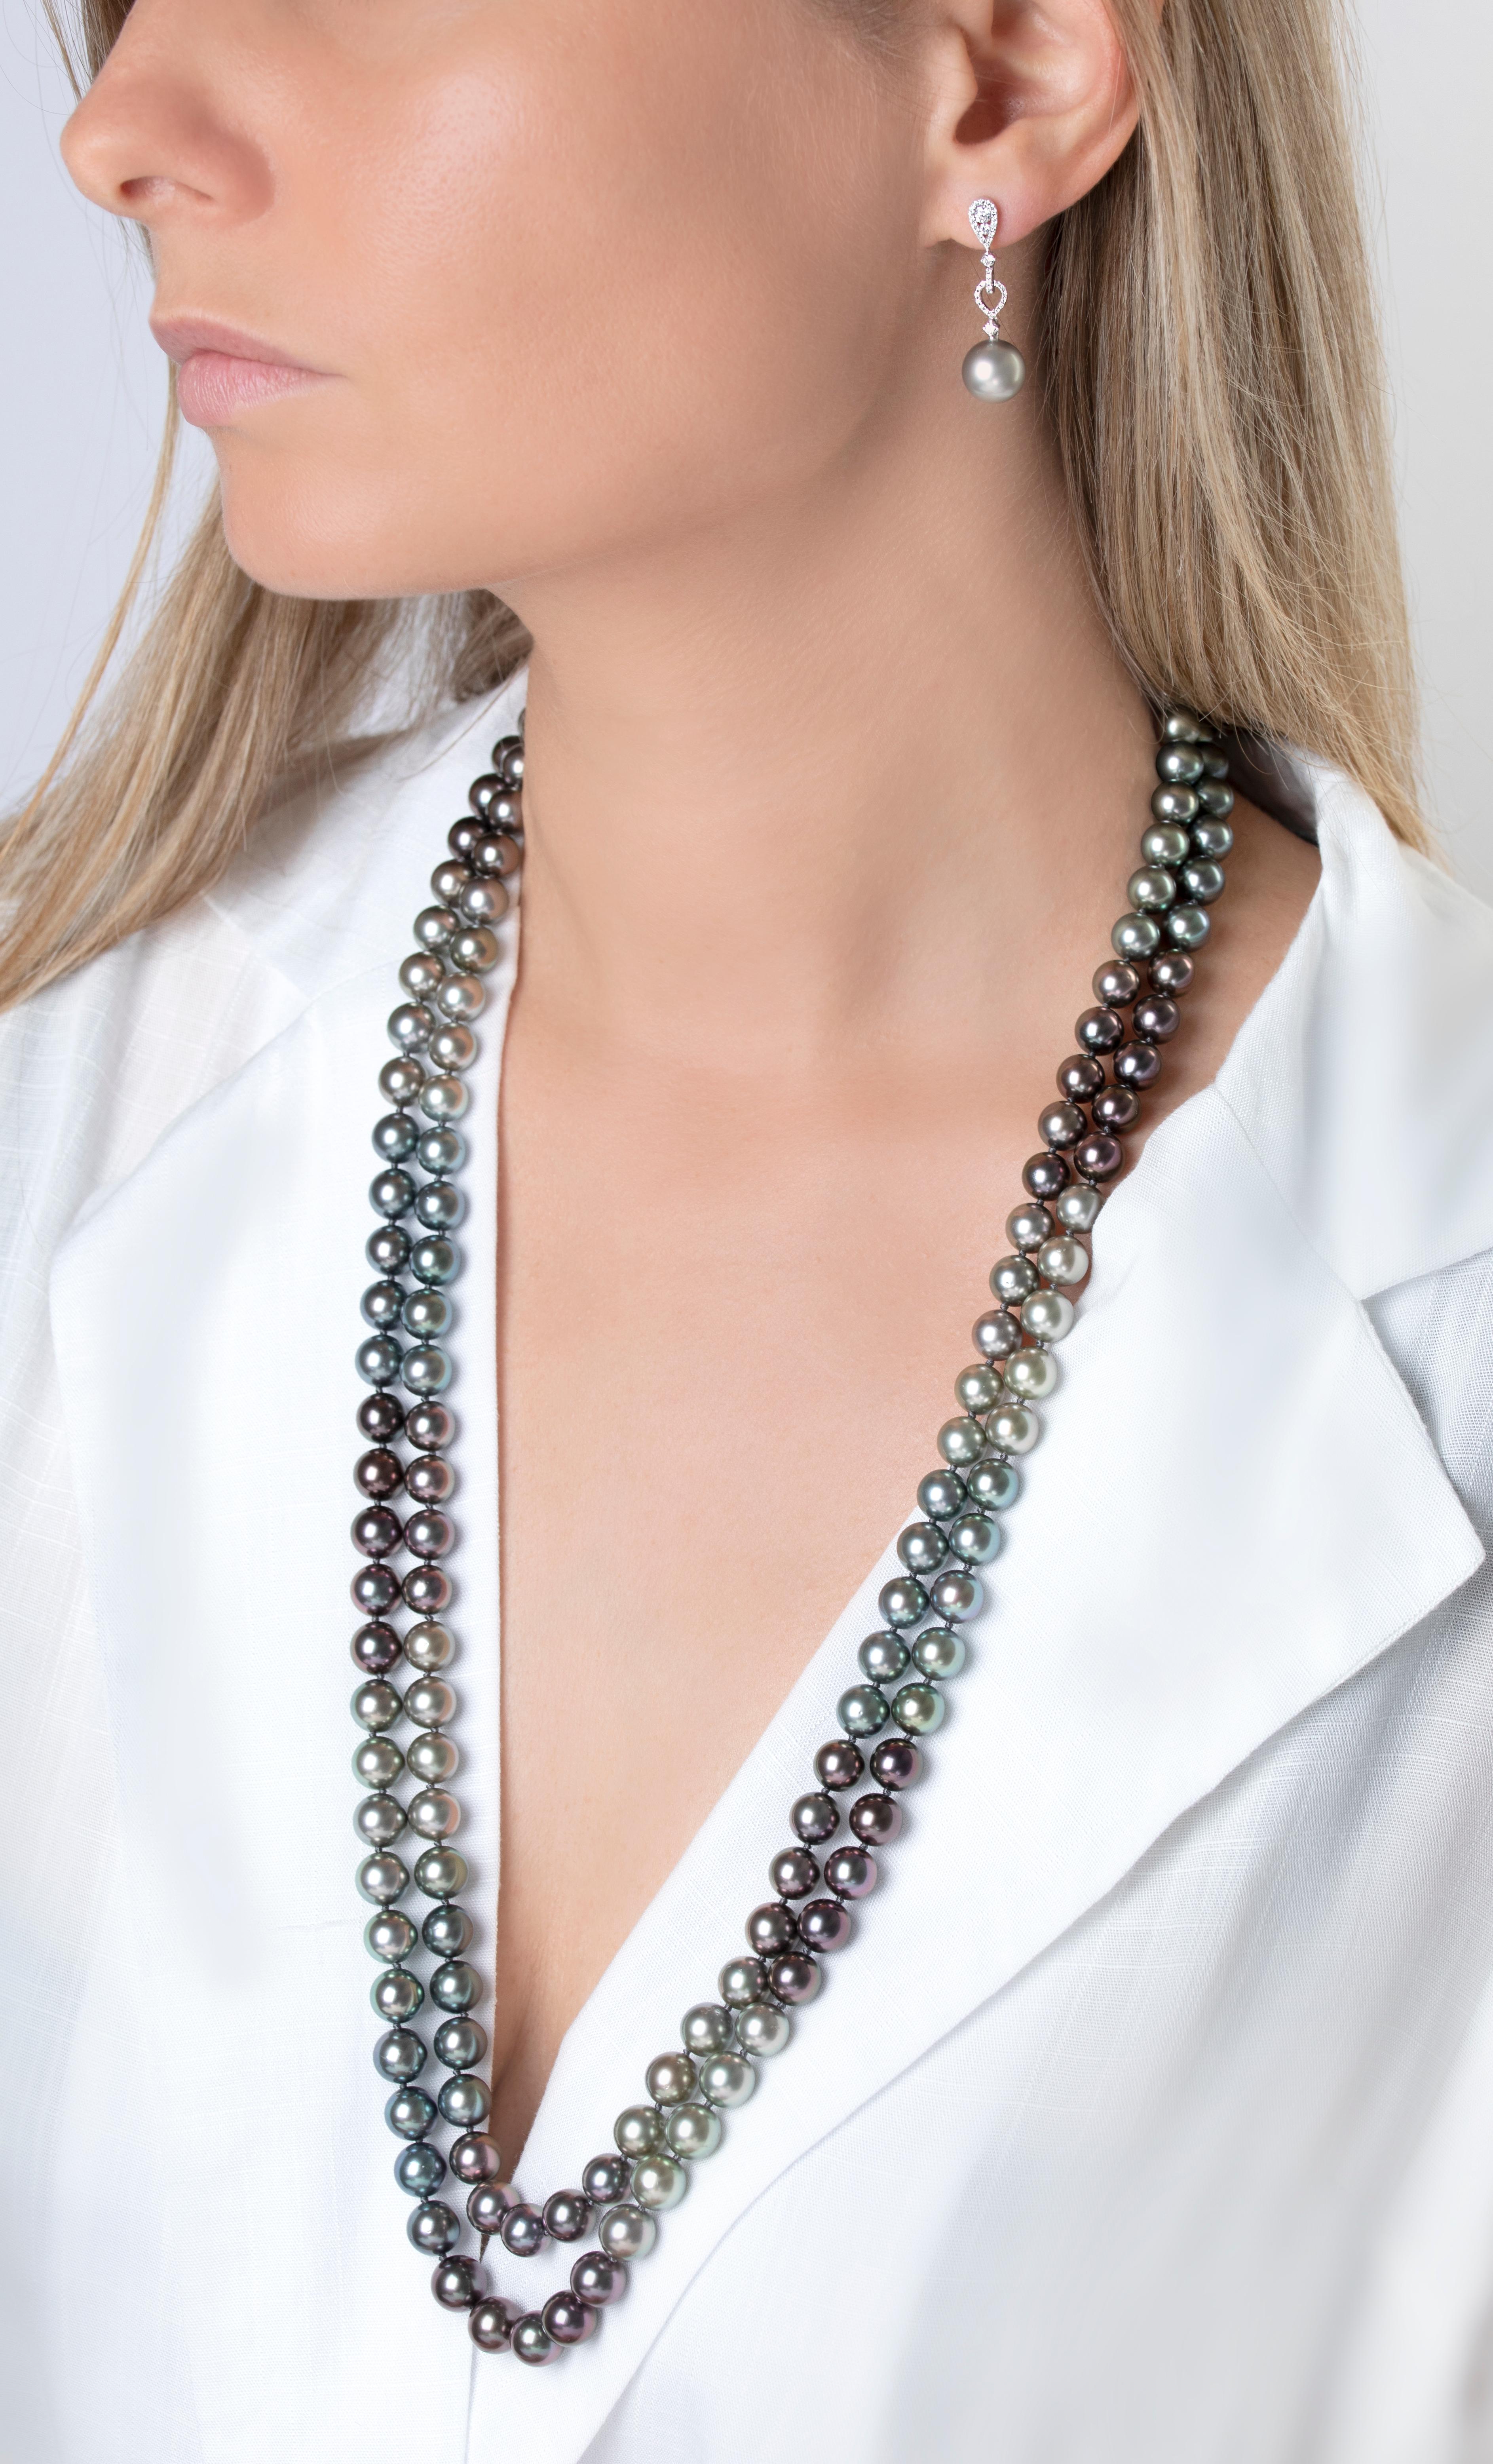 This intriguing necklace by Yoko London features two rows of lustrous Tahitian pearls which graduate softly in colour from a grey-purple hue through to a delicate grey-green hue. Secured to a pretty diamond set clasp, this necklace is easily worn in